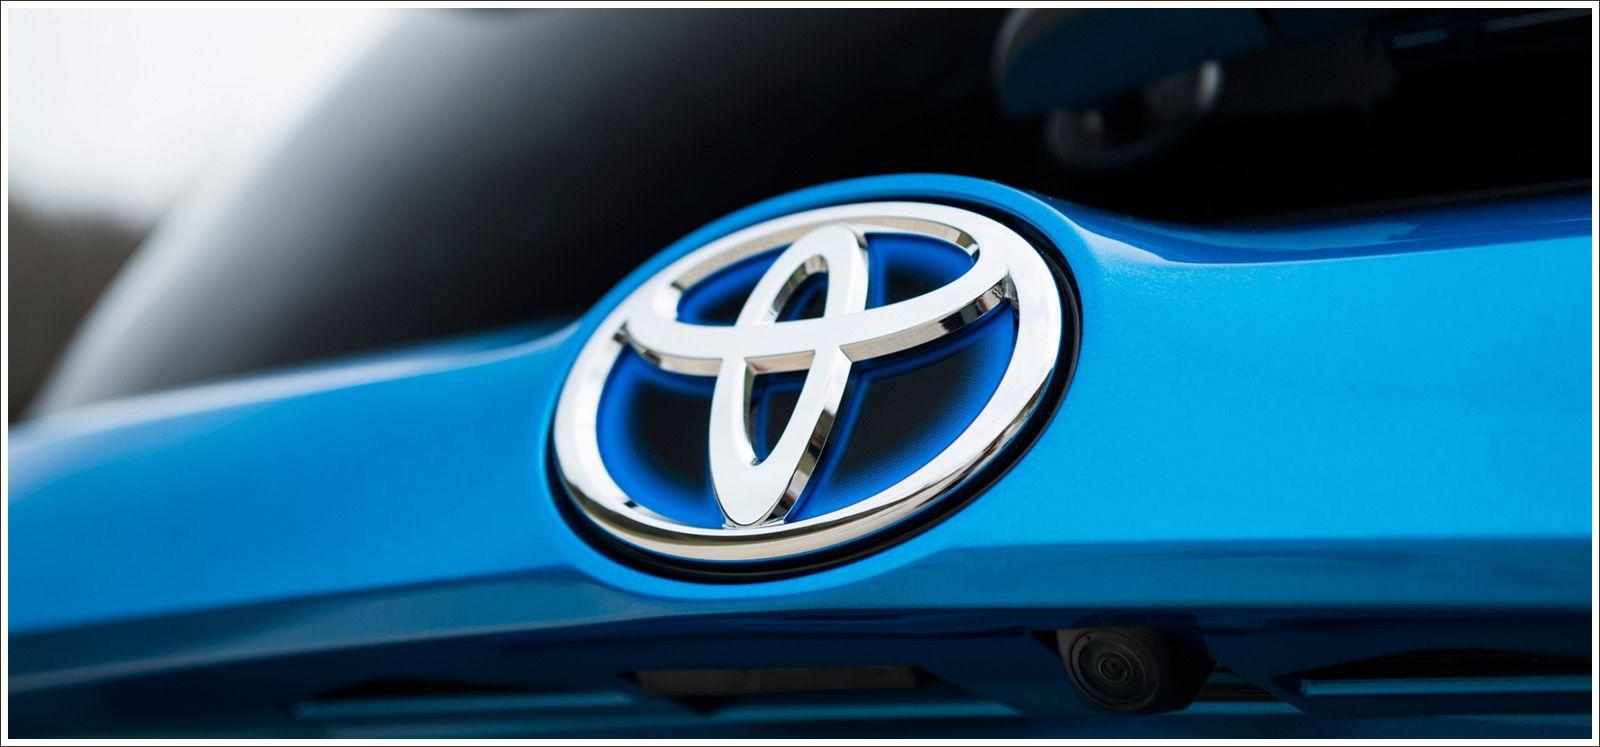 Blue Toyota Logo - Toyota Logo Meaning and History, latest models | World Cars Brands